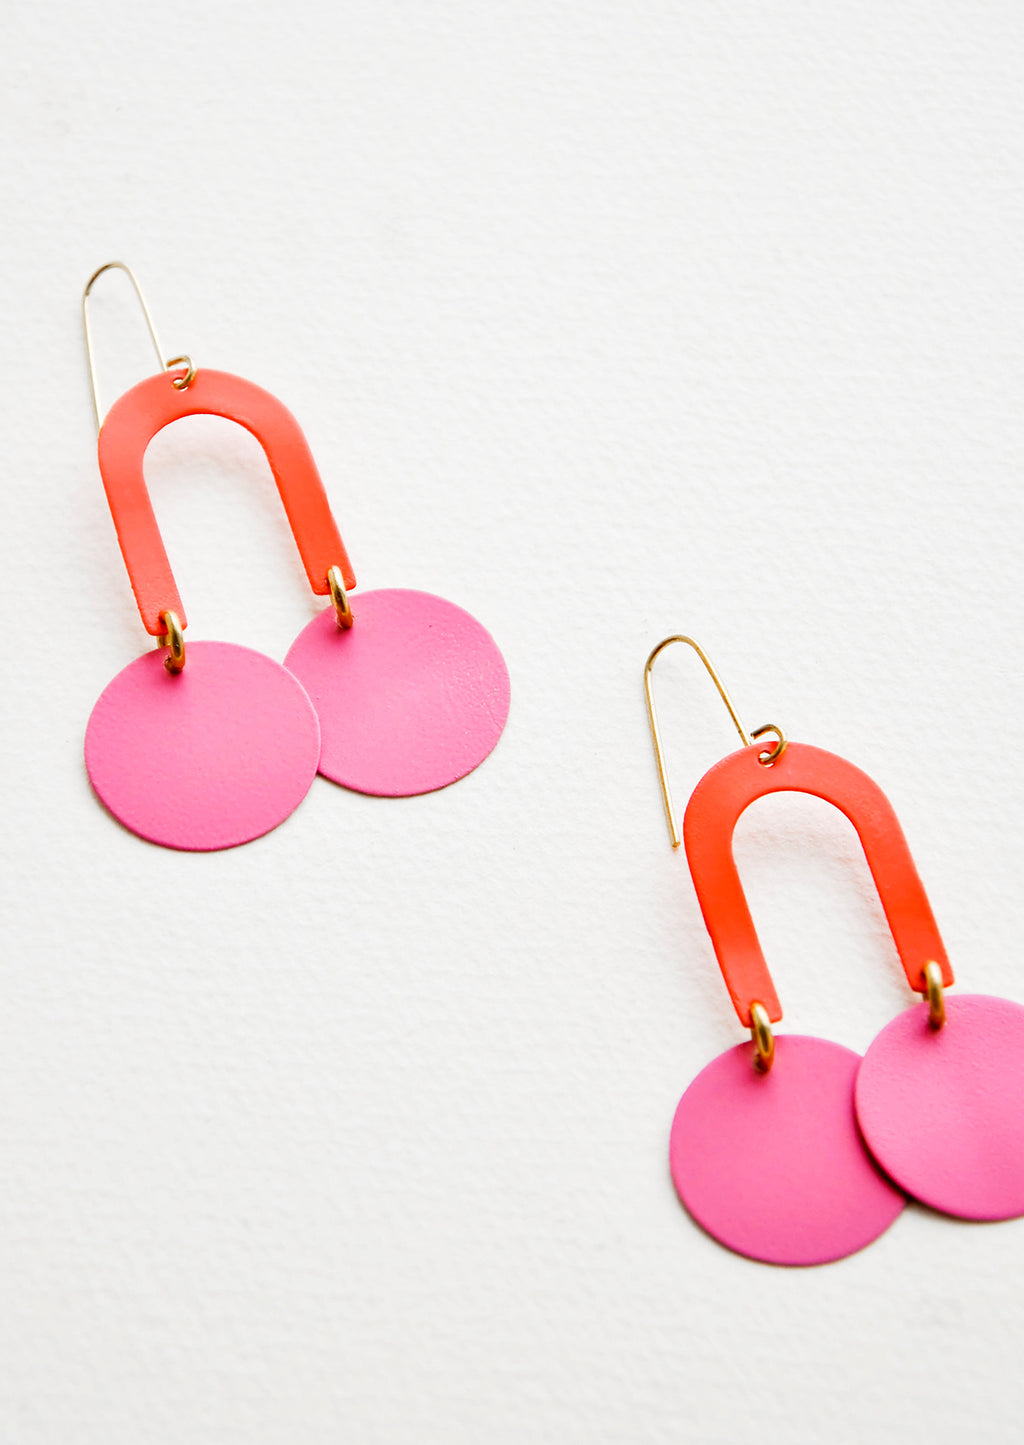 Coral / Pink: Two-toned pink earrings form a curved arc with two discs at each end.